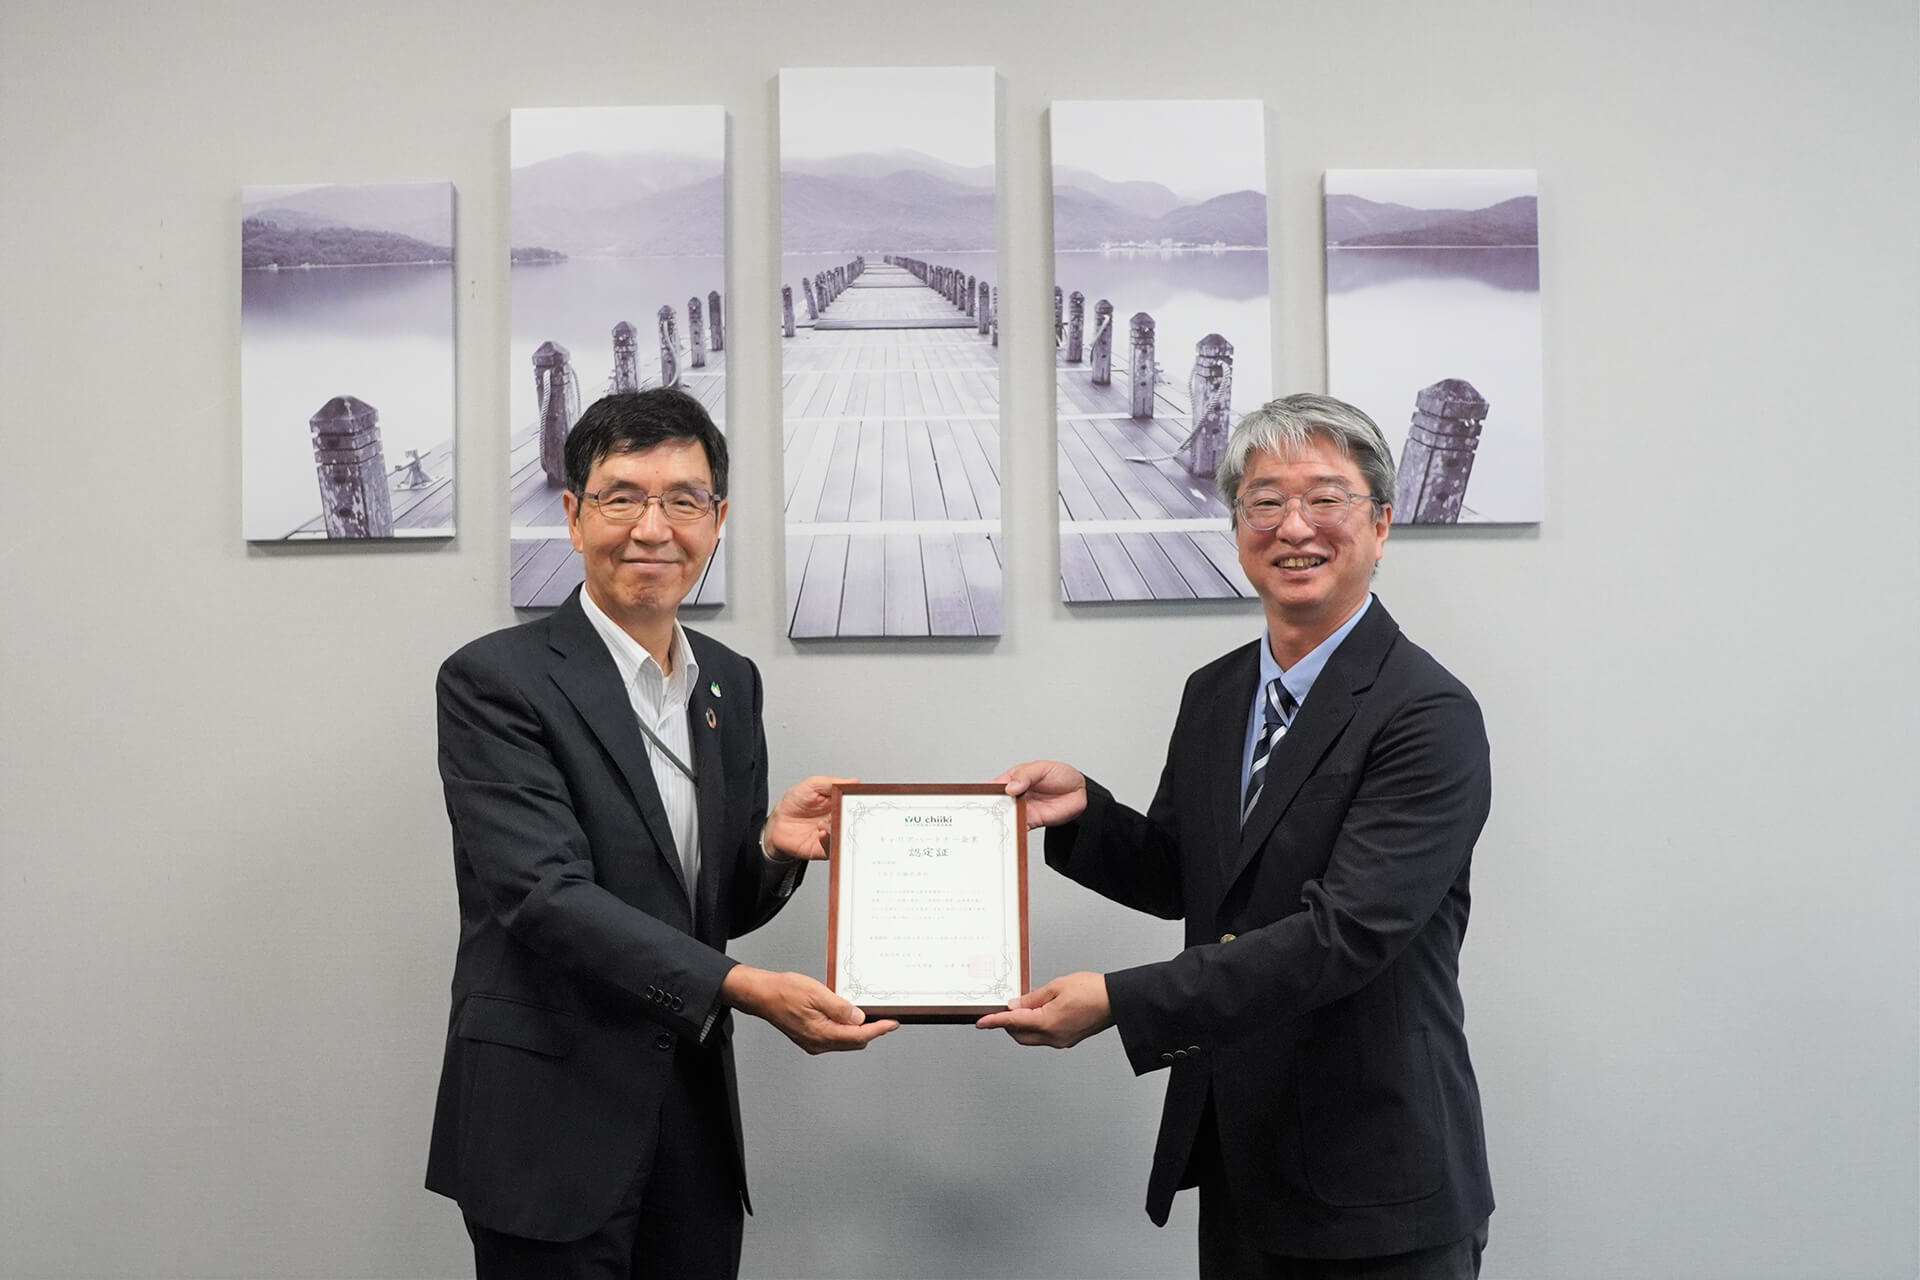 JRCS Executive Vice-President received a certificate from Vice President of Yamaguchi University.